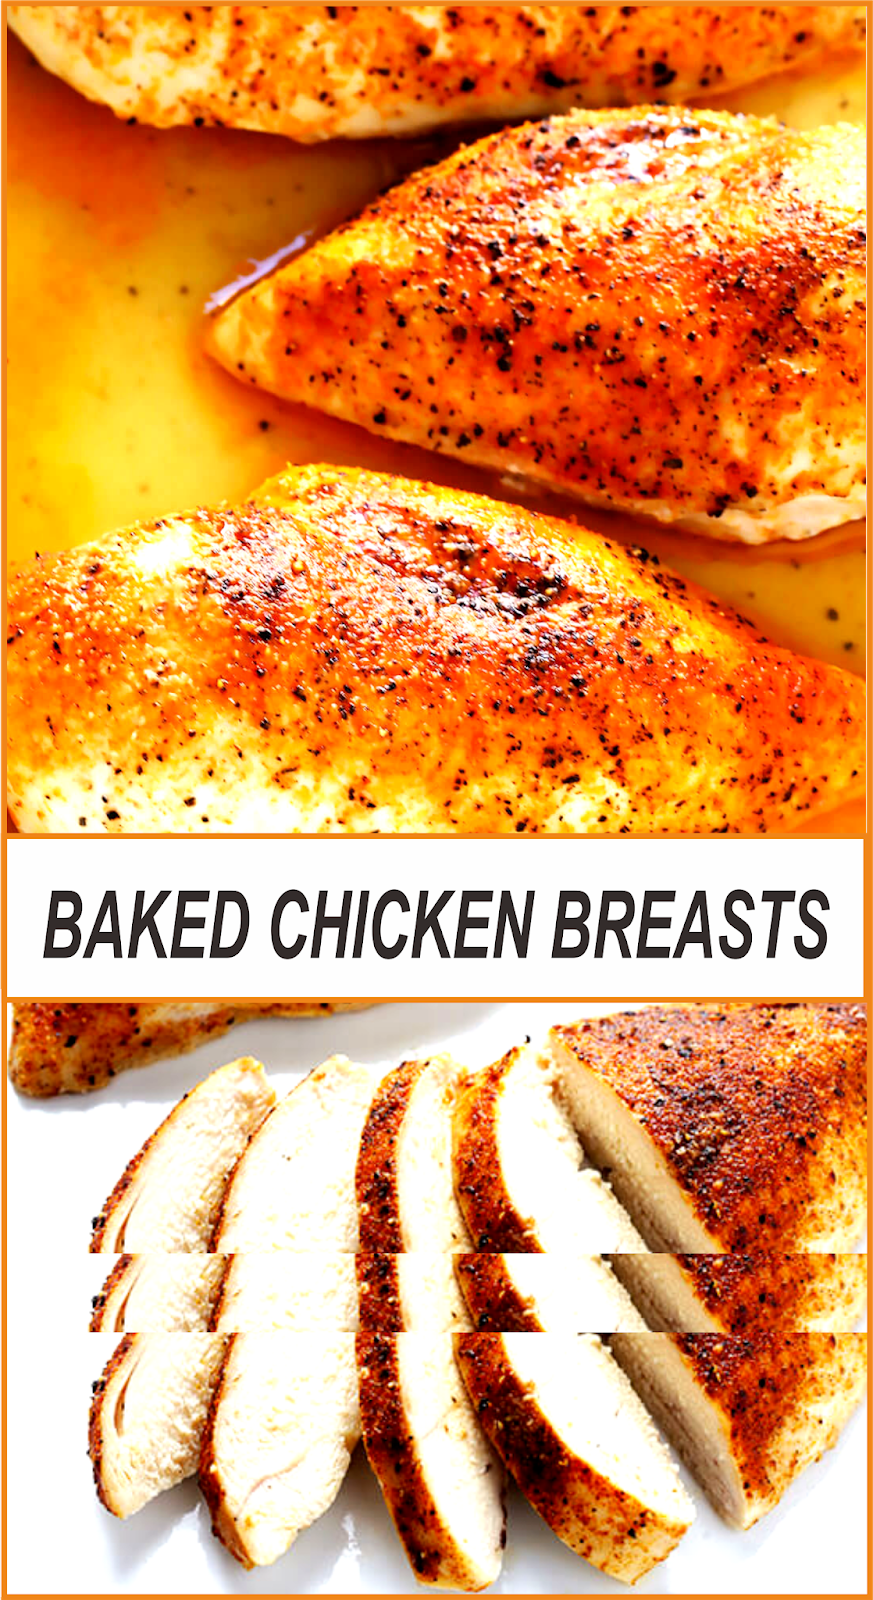 #BAKED #CHICKEN #BREASTS | Think food